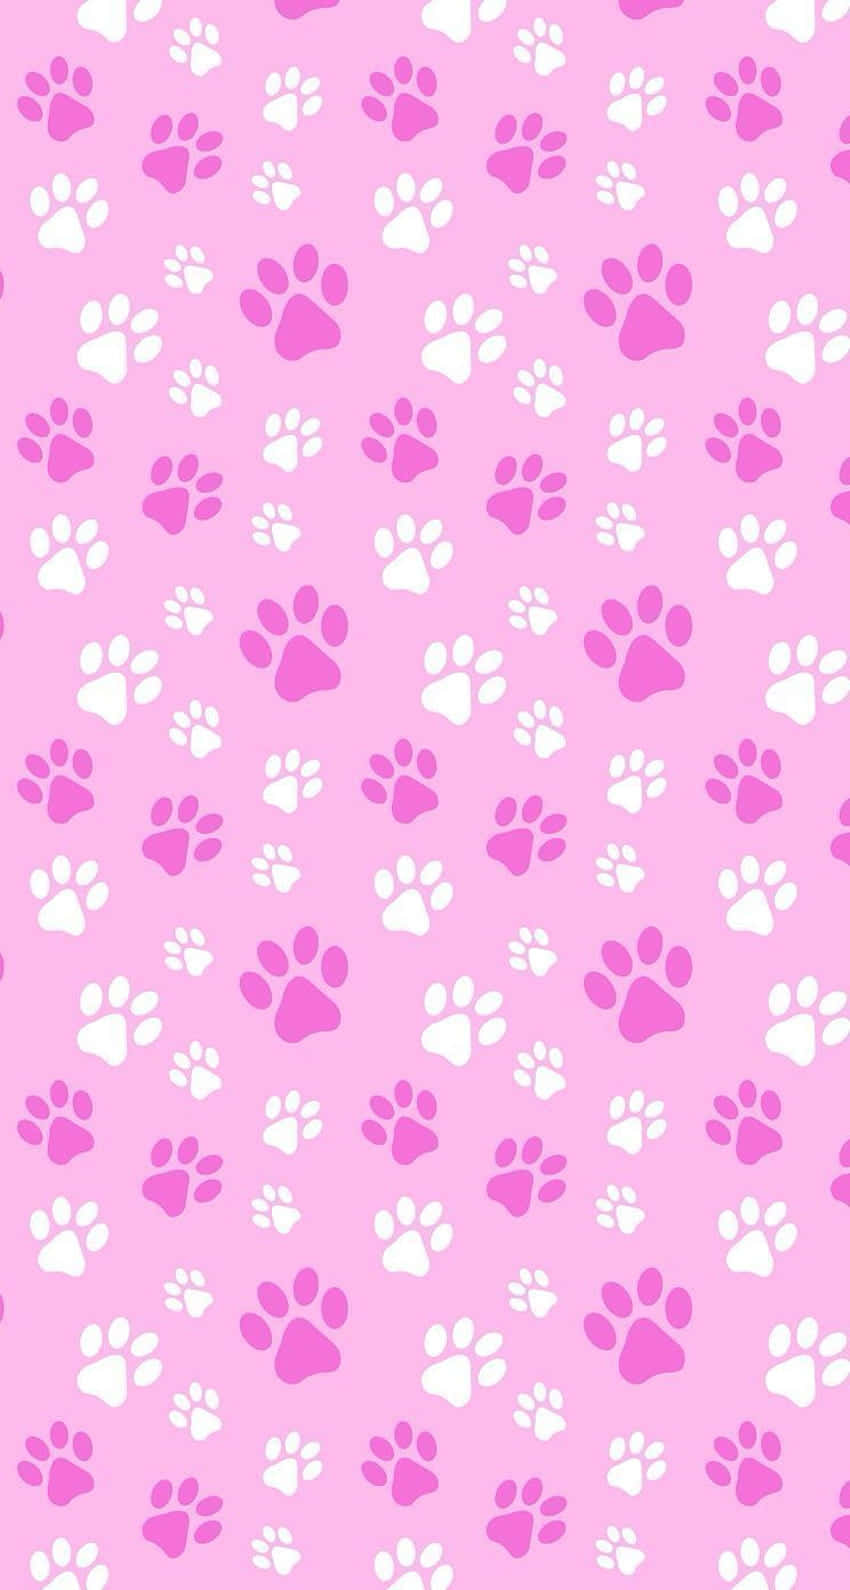 Get your paws on this paw-lific wallpaper today!